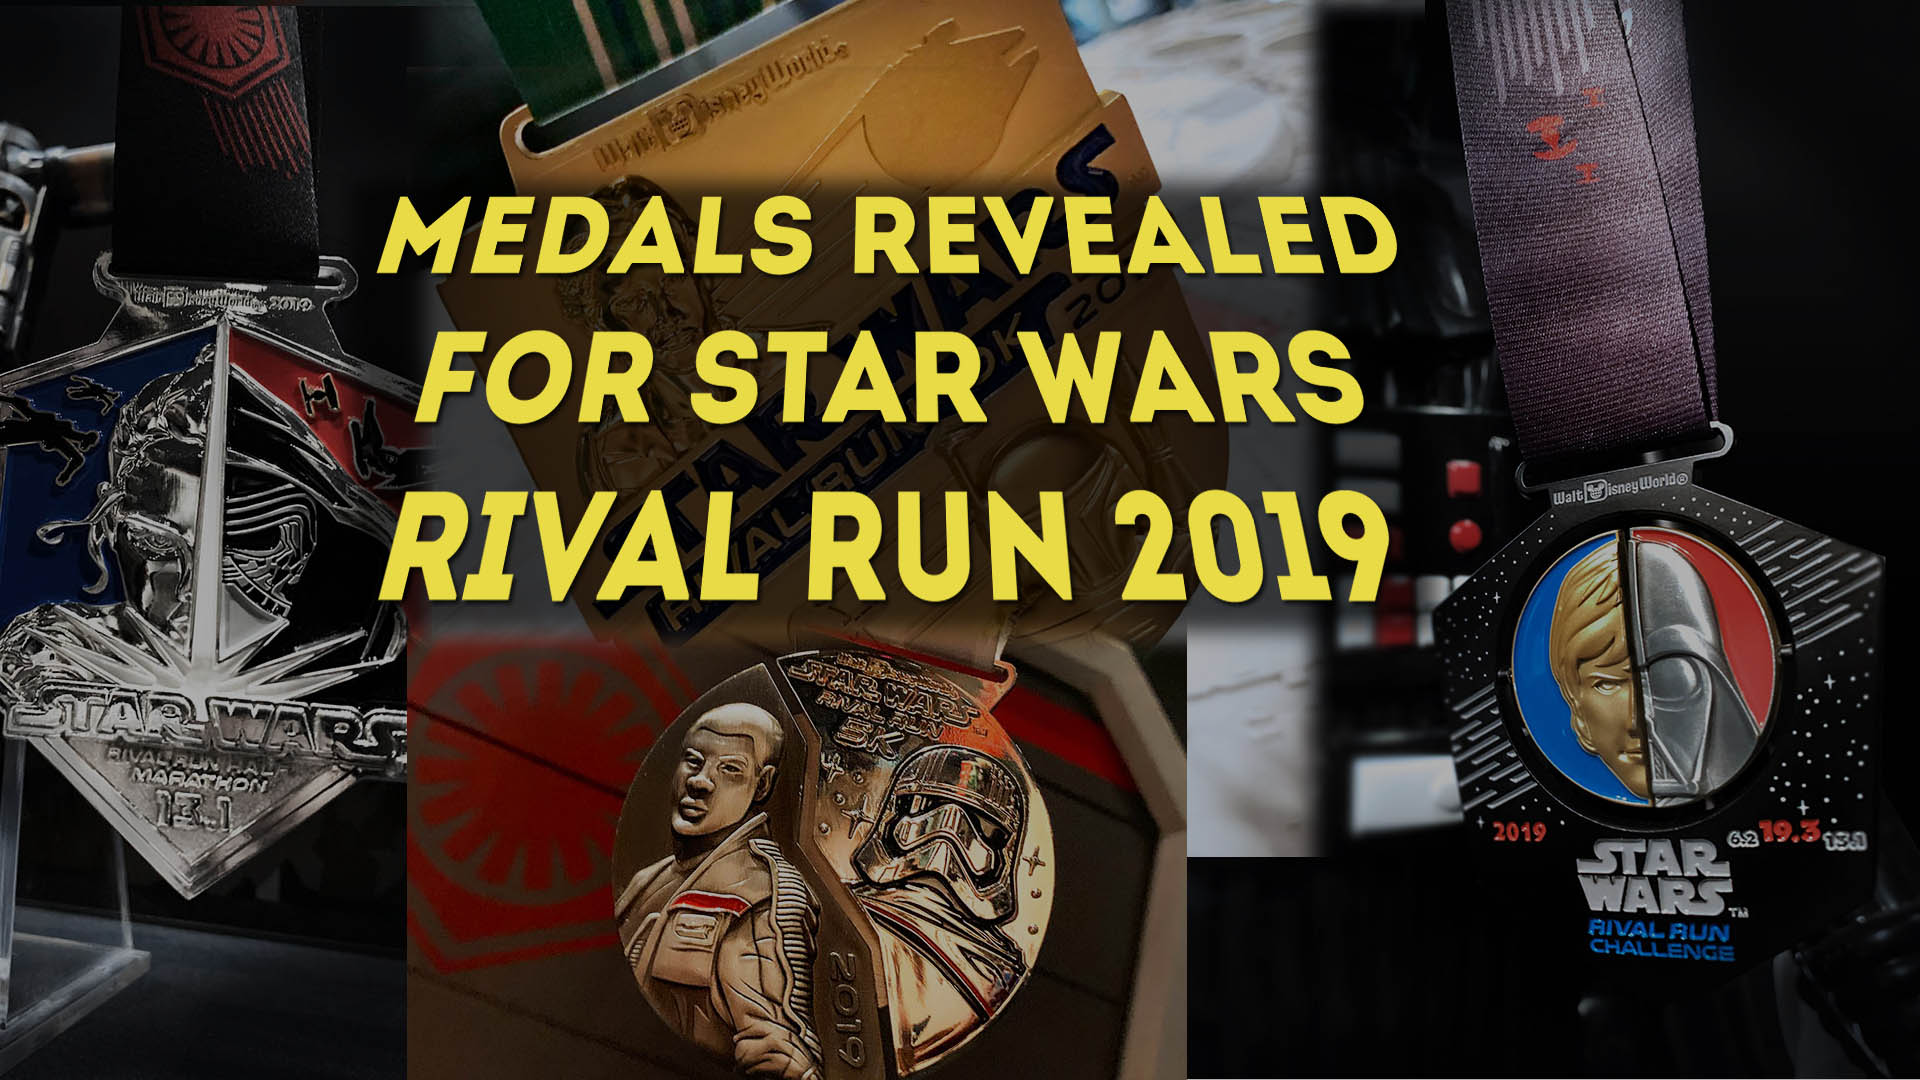 Take a Look at the Medals for Star Wars Rival Run 2019